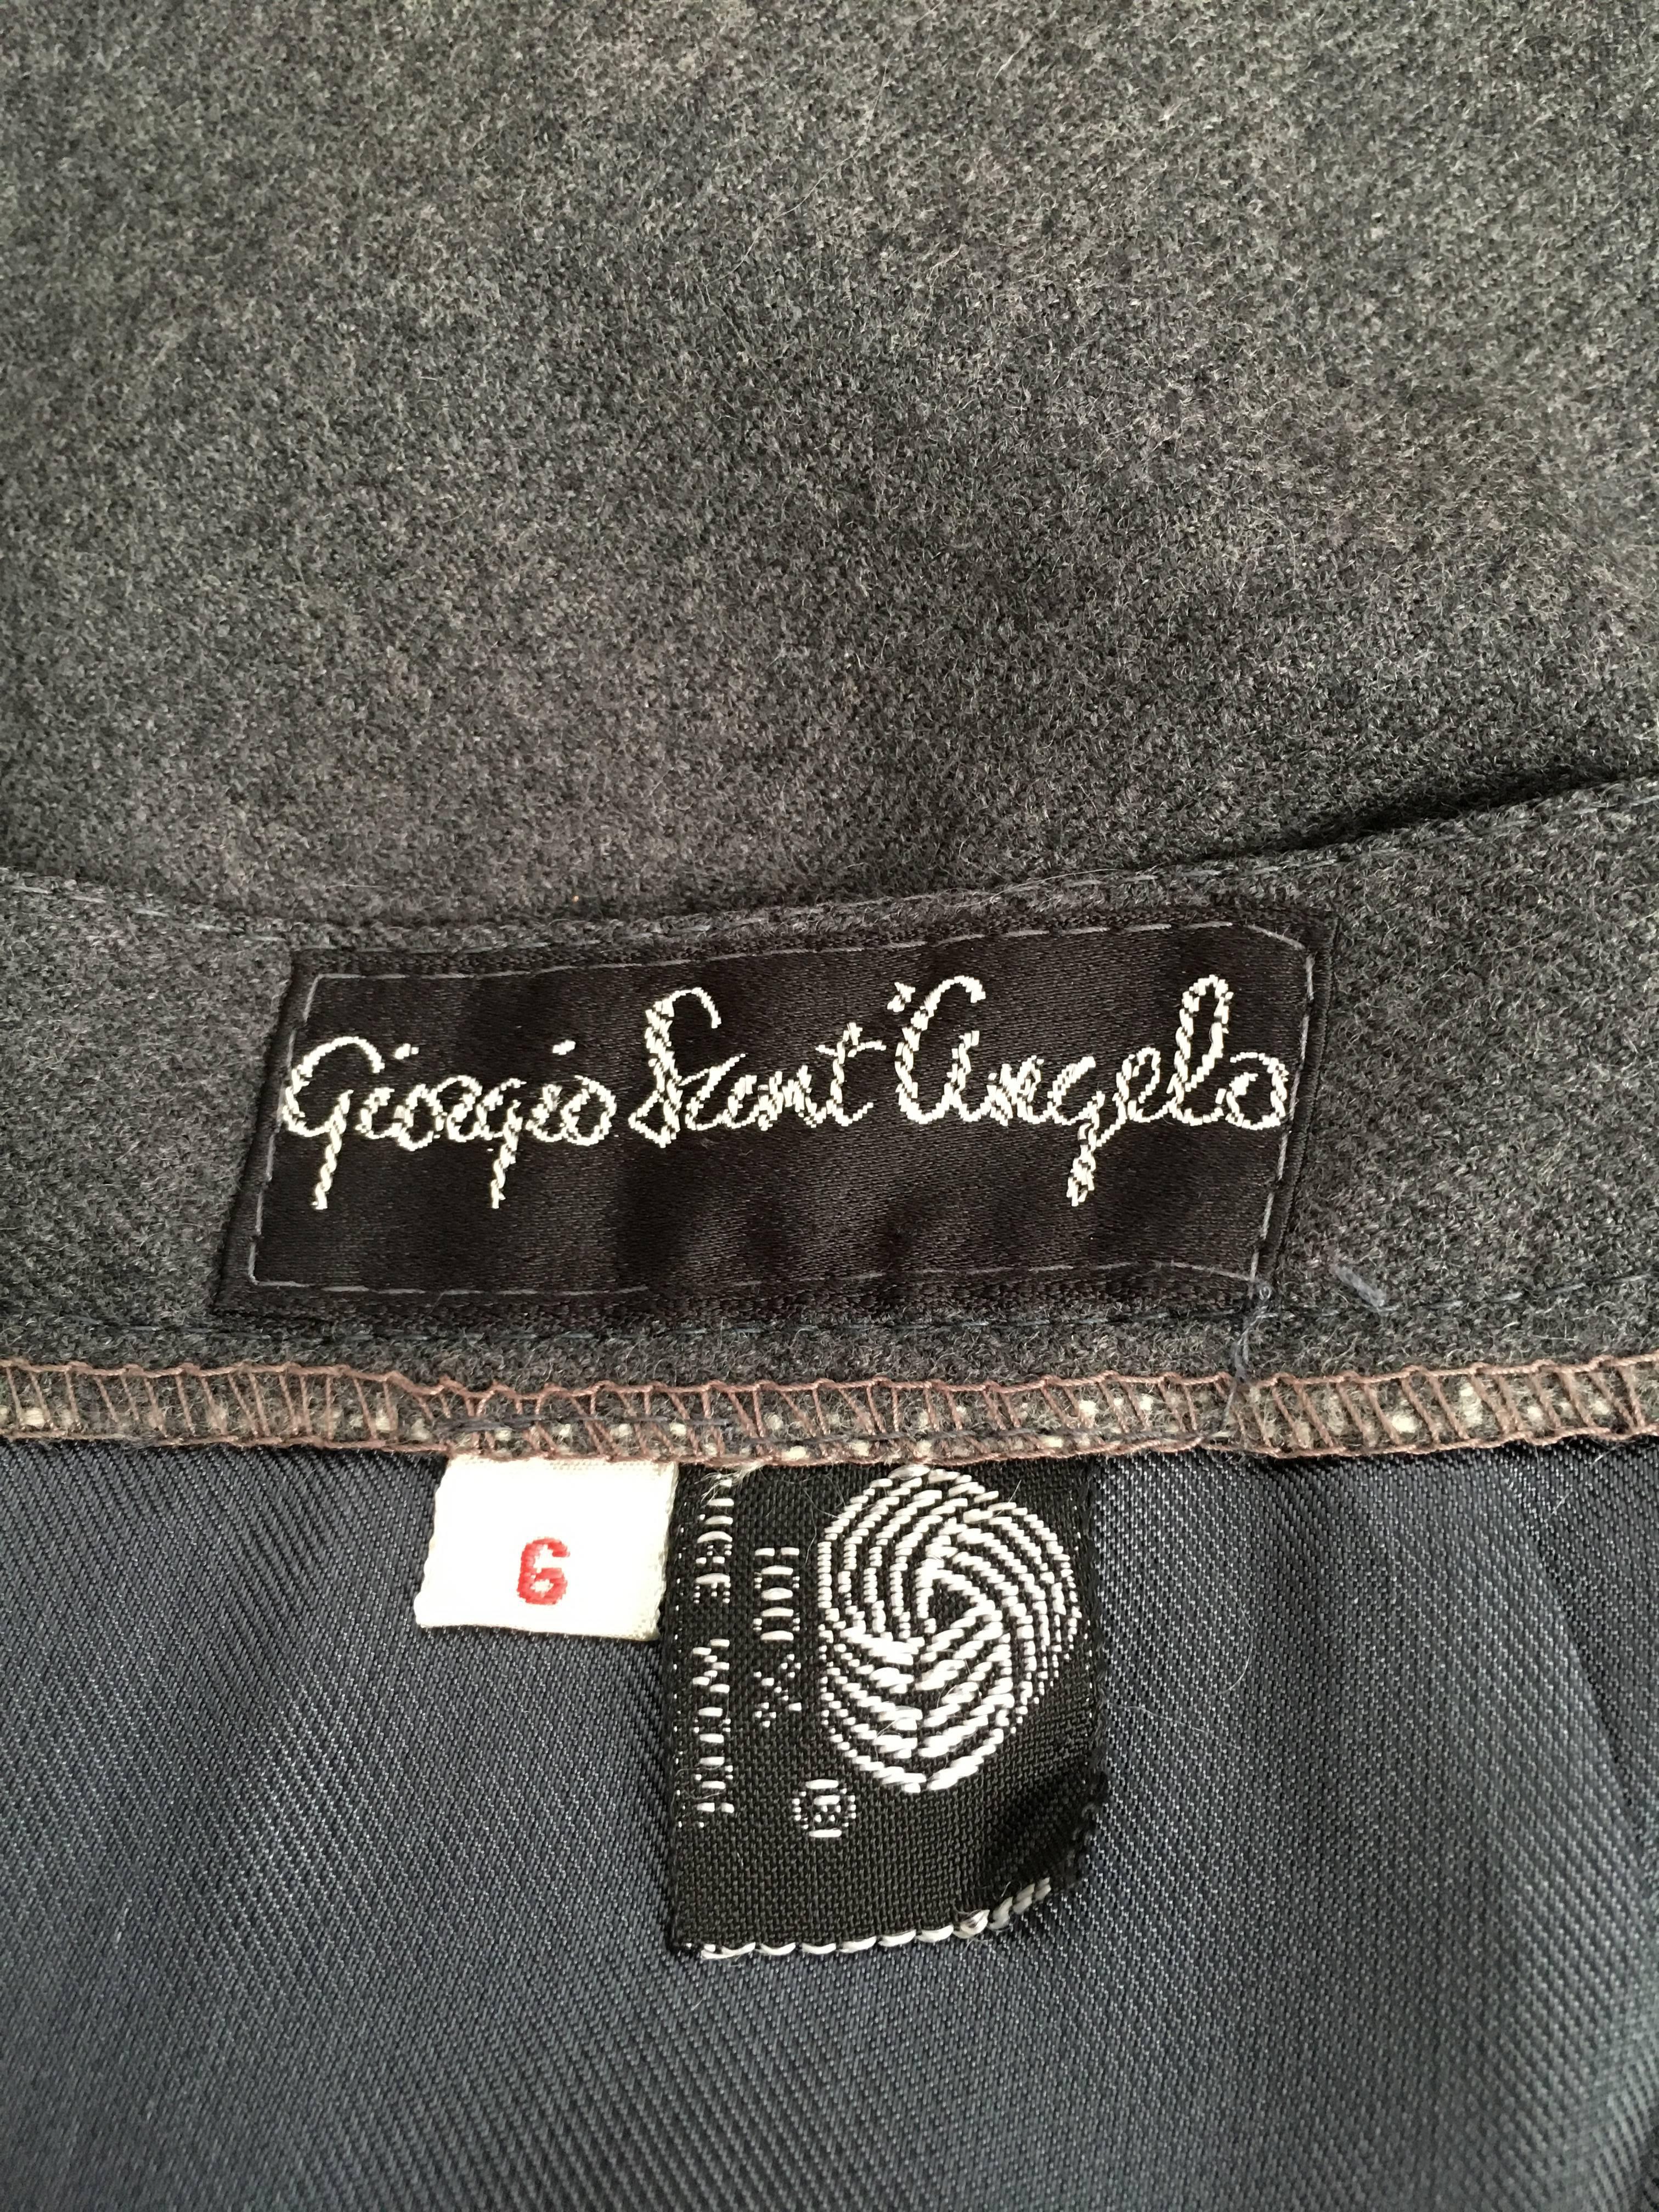 Giorgio Saint' Angelo Grey Wool Straight Skirt with Pockets Size 4.  For Sale 5